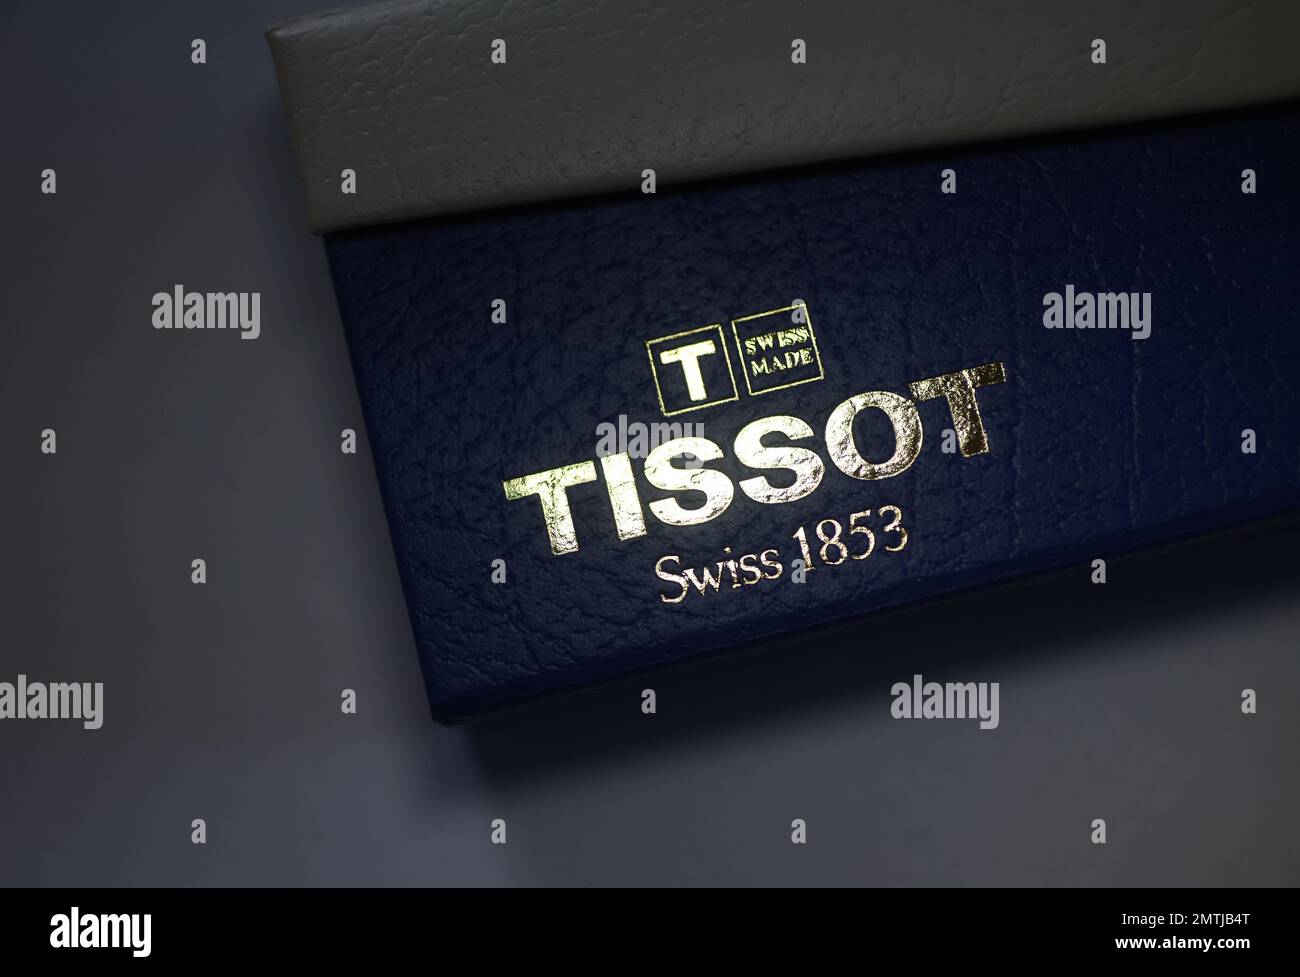 Tissot SA is a Swiss watchmaker. Stock Photo